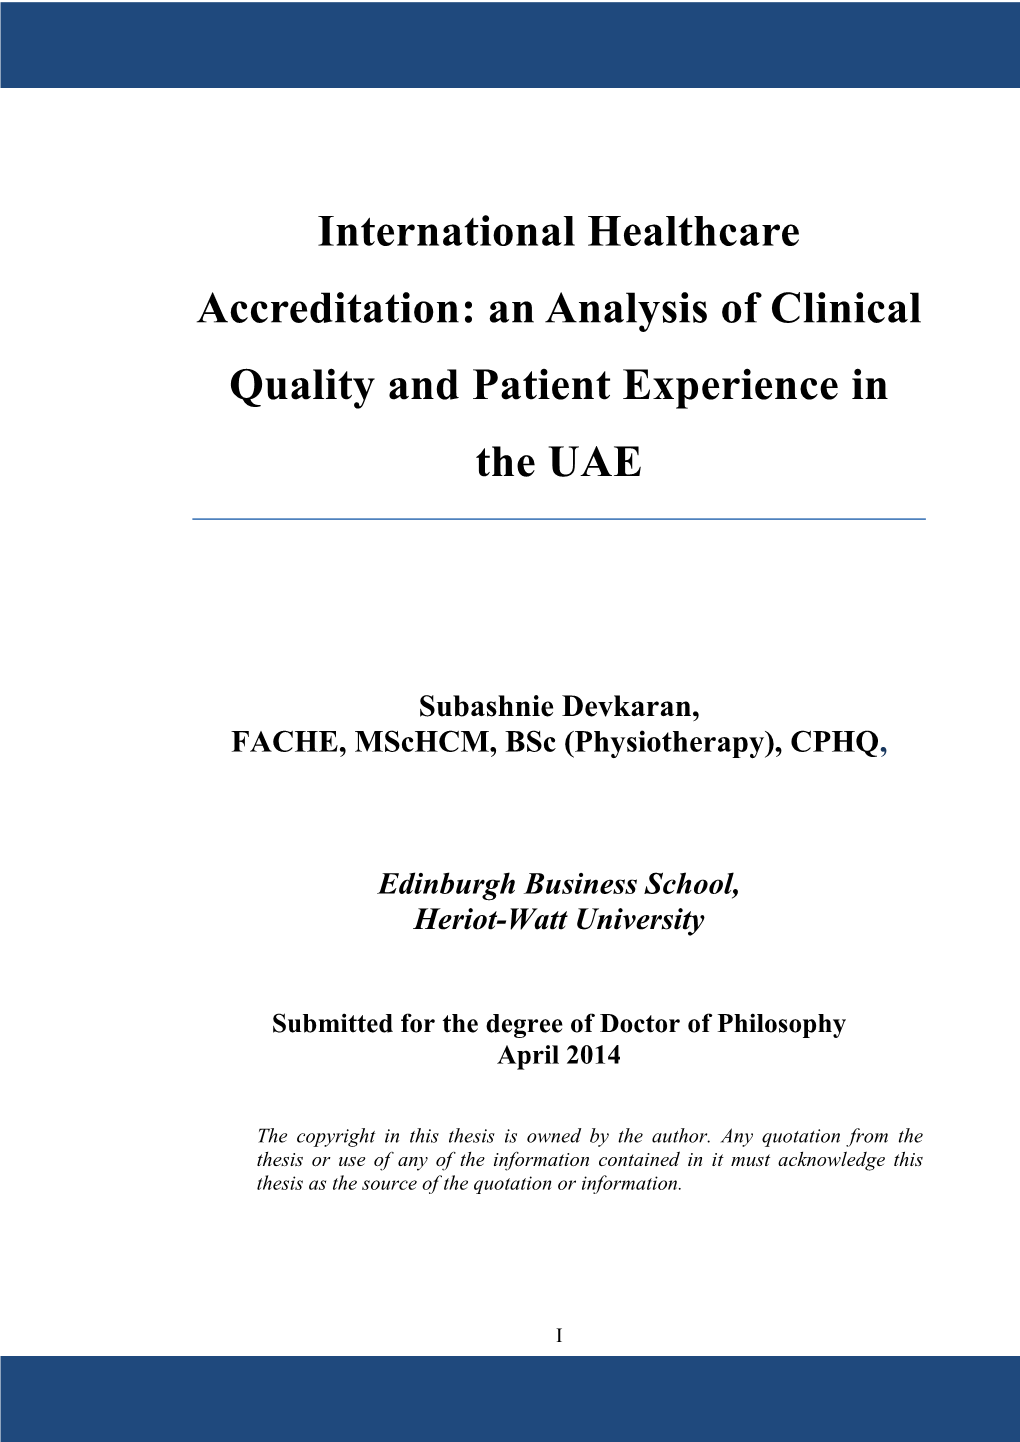 International Healthcare Accreditation: an Analysis of Clinical Quality and Patient Experience in the UAE